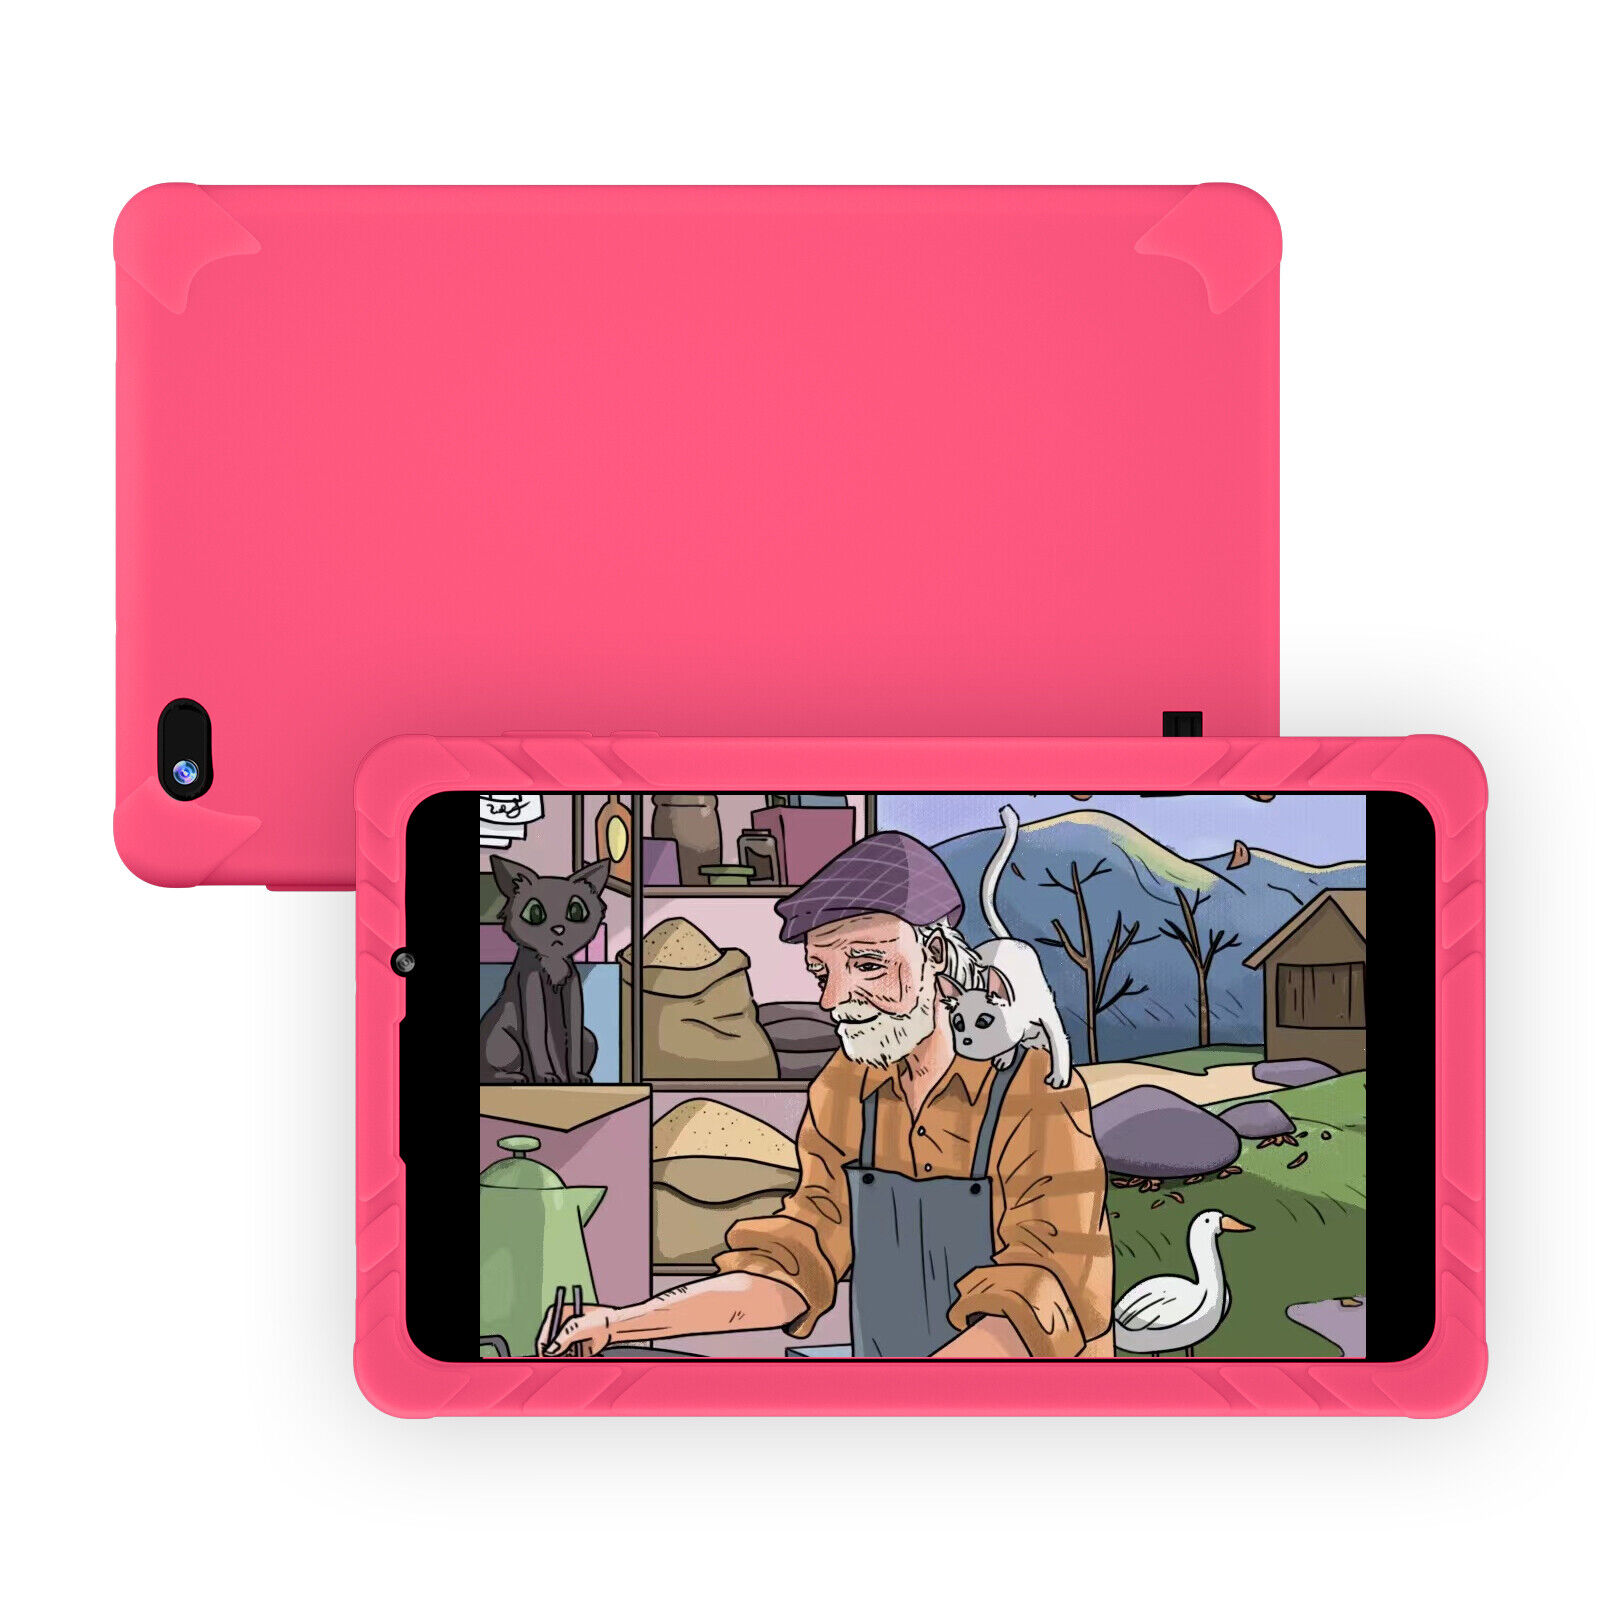 SGIN Tablet for Kids 8 Inch Android with Parental Control APP 2GB RAM 64GB ROM